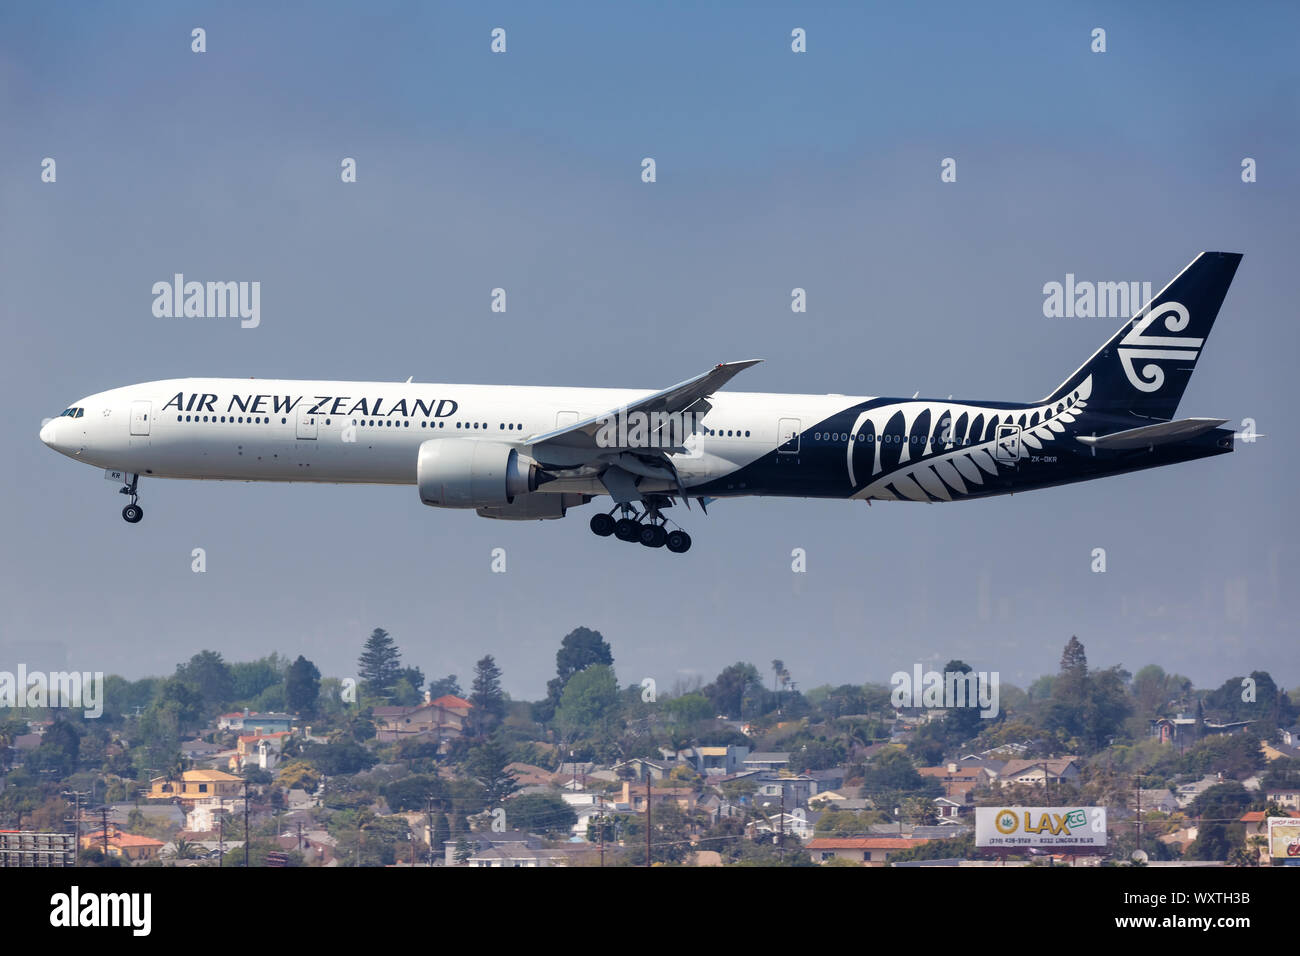 Los Angeles, California – April 14, 2019: Air New Zealand Boeing 777-300ER airplane at Los Angeles International airport (LAX) in the United States. Stock Photo